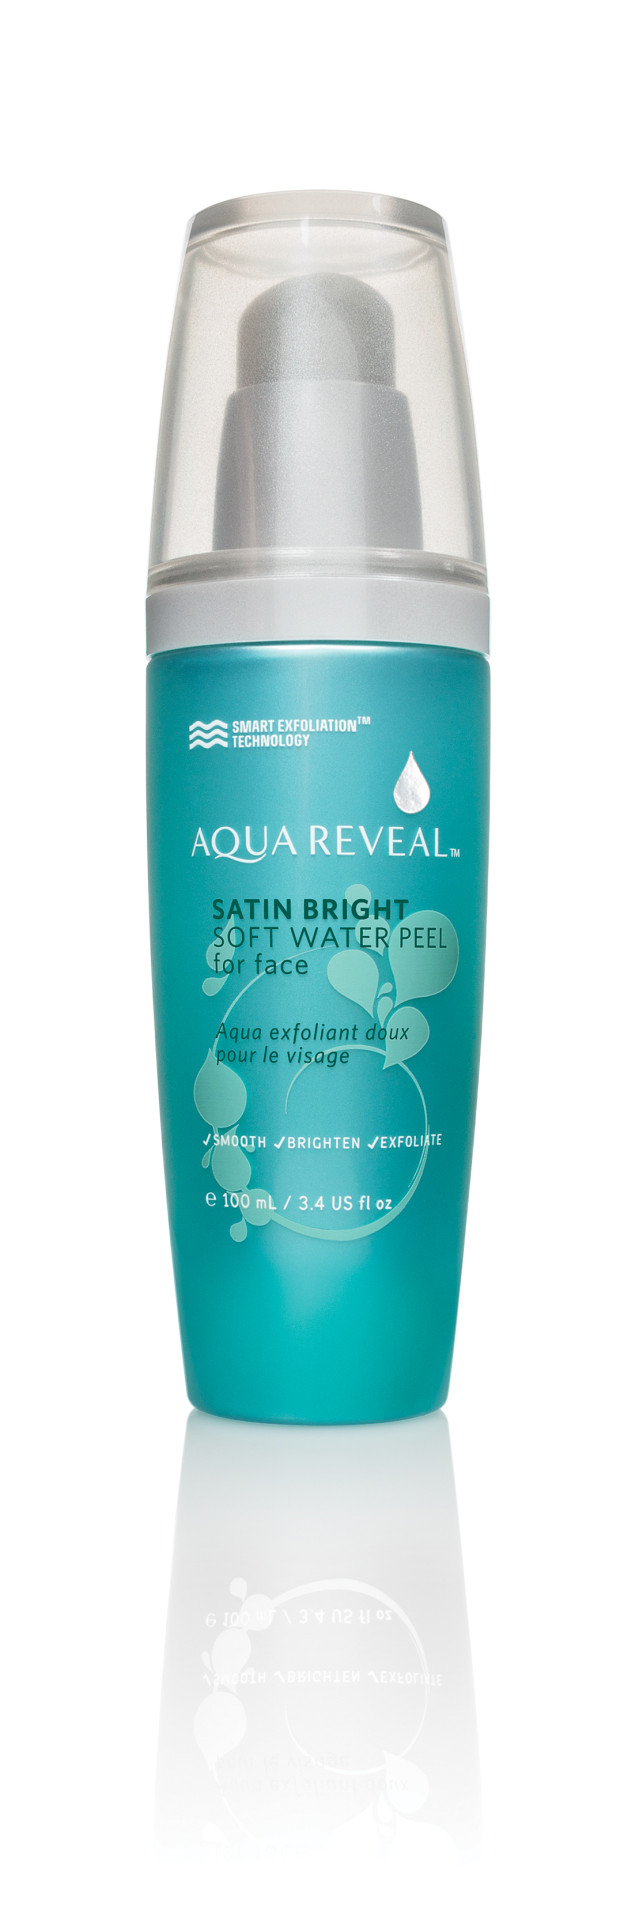 Aquareveal Satin Bright Soft Water Peel for Face